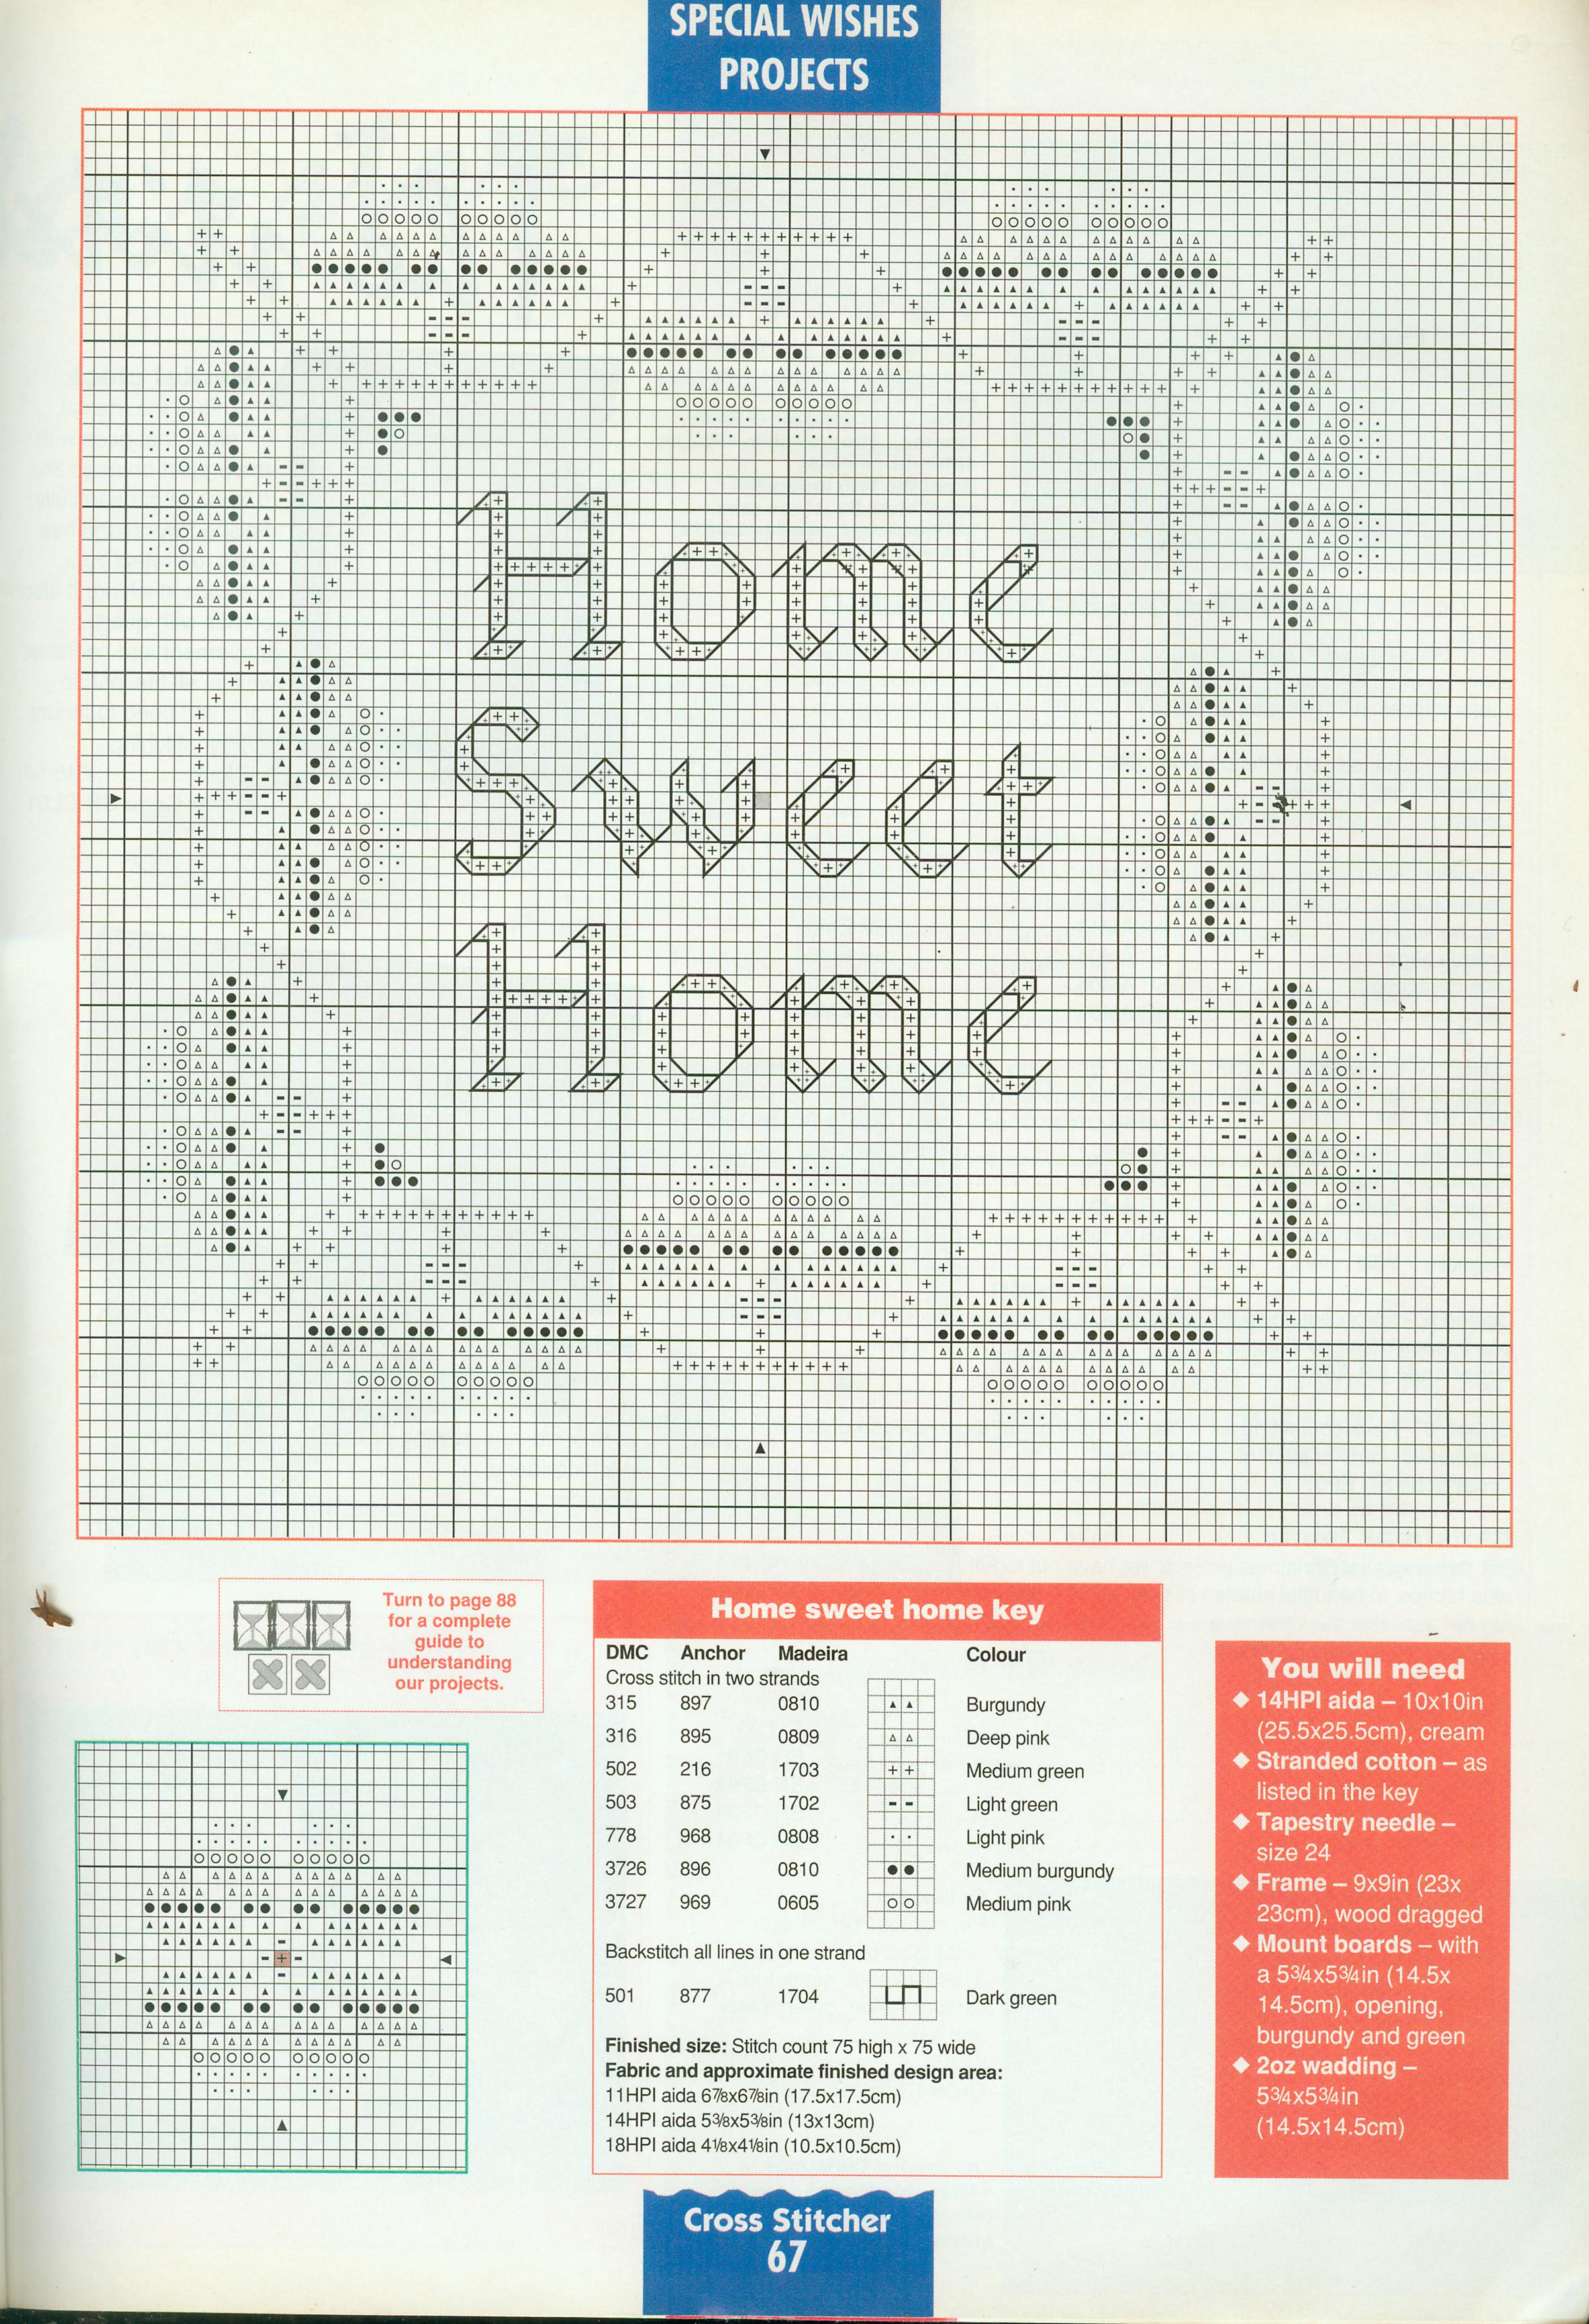 Cross stitch home sweet home picture beautiful (2)